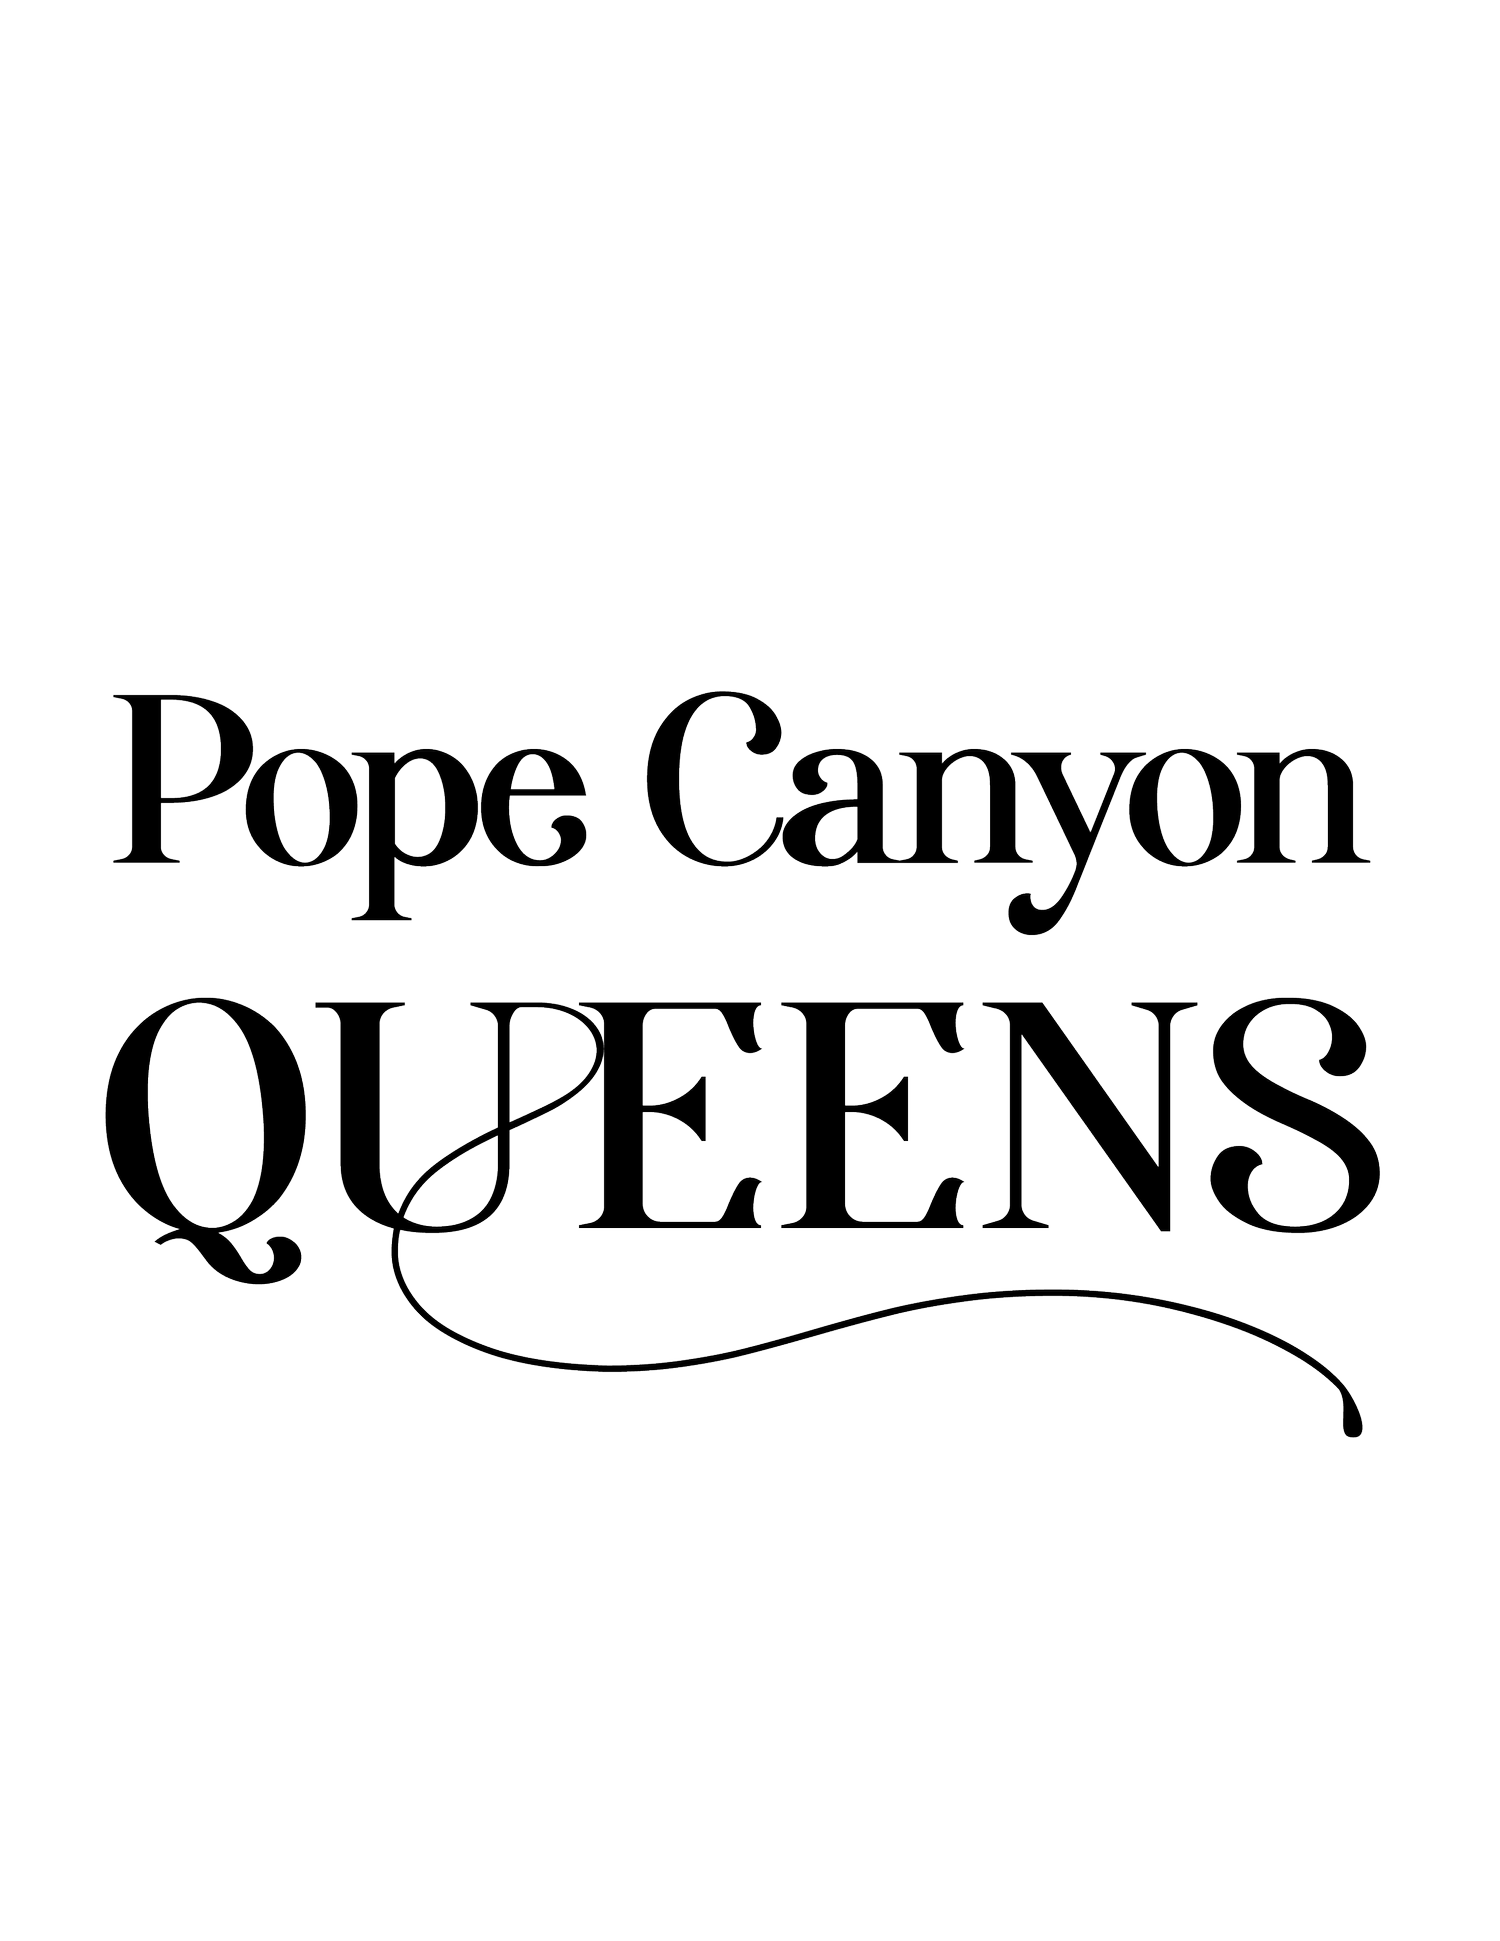 POPE CANYON QUEENS LLC